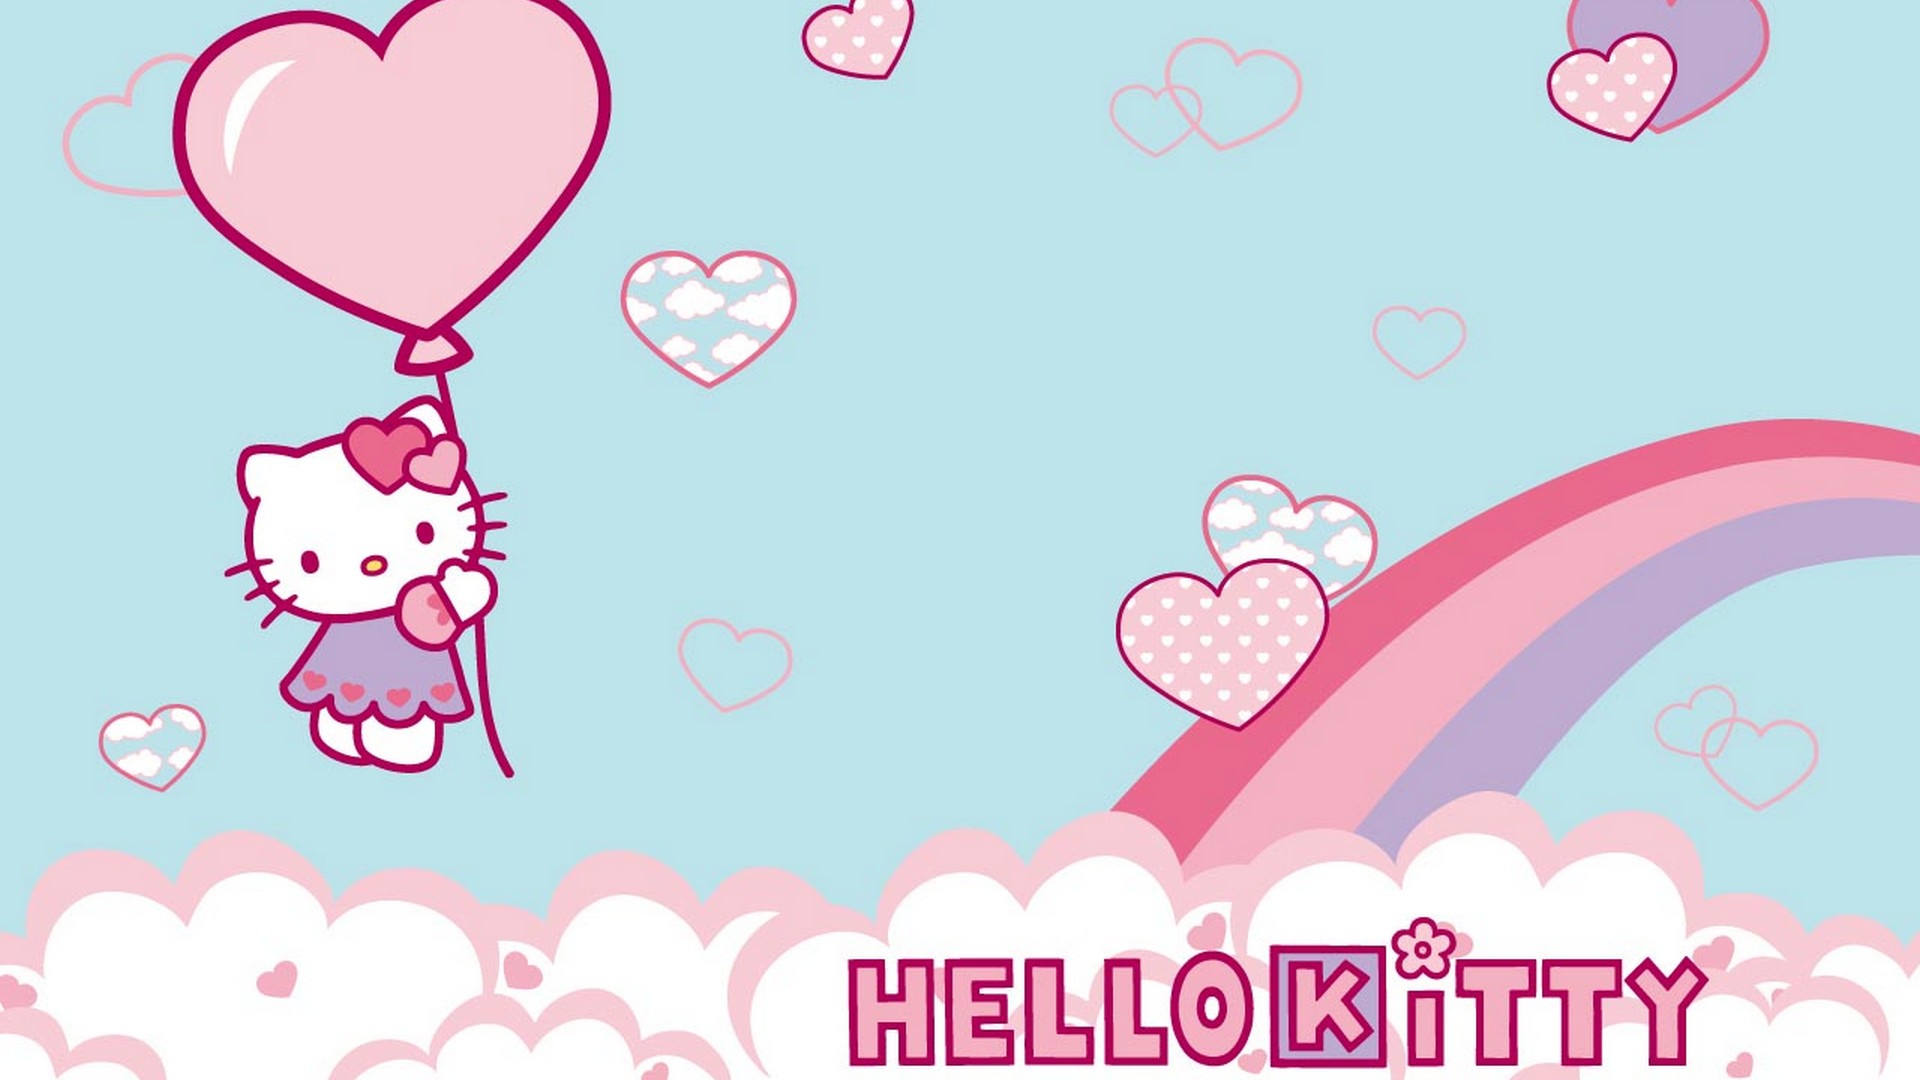 Wallpaper Hello Kitty Images Desktop with image resolution 1920x1080 pixel. You can use this wallpaper as background for your desktop Computer Screensavers, Android or iPhone smartphones